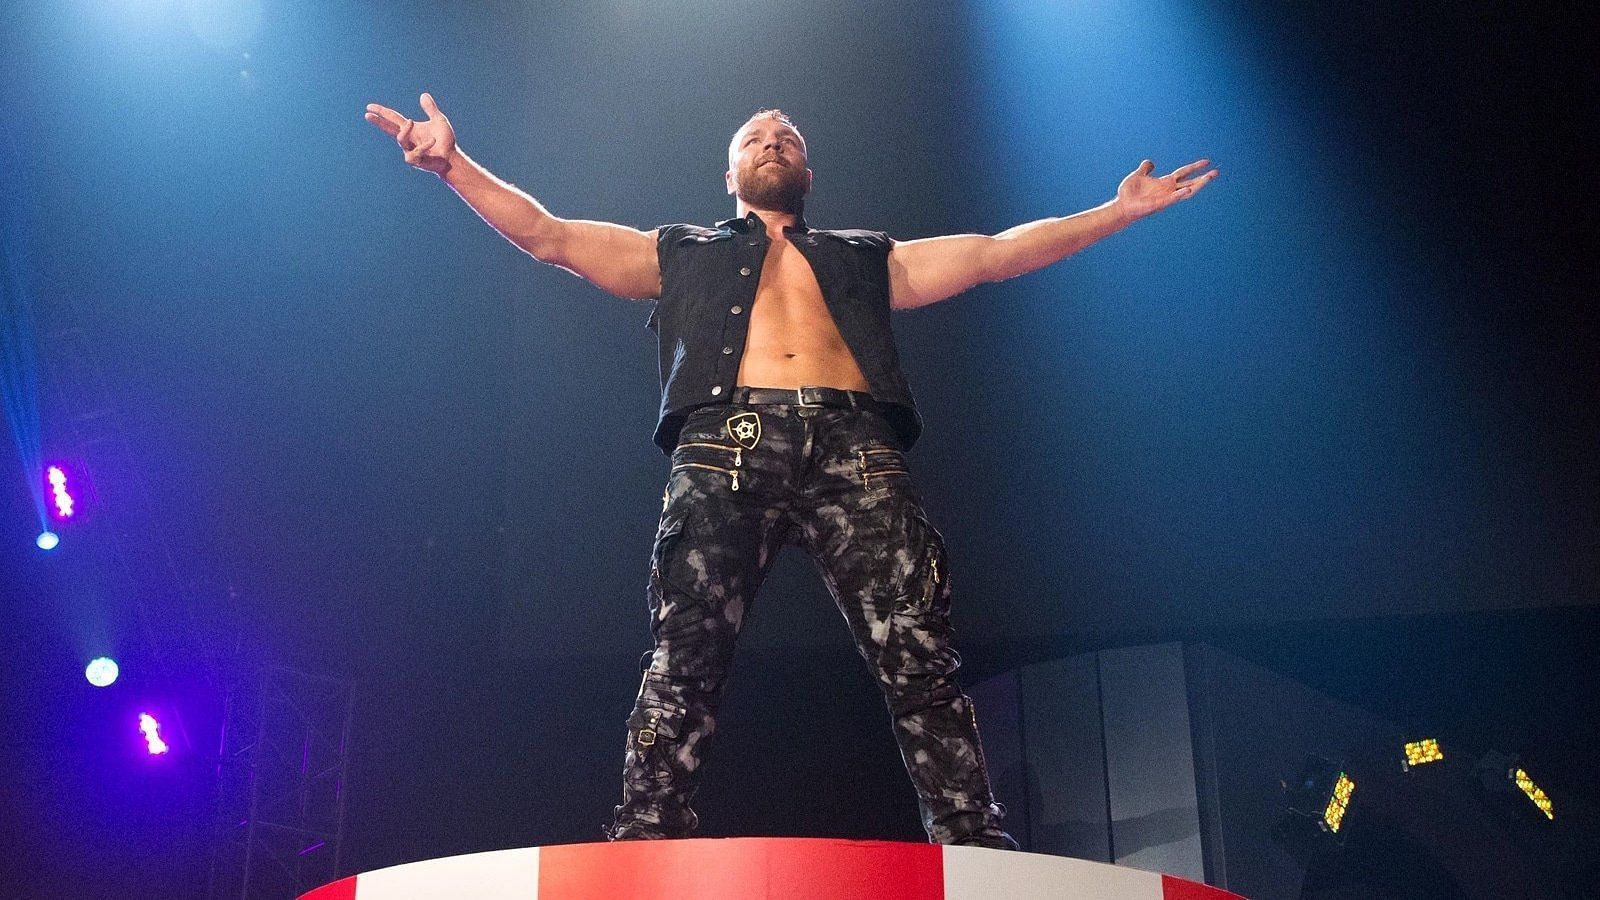 Jon Moxley making his AEW debut in 2019